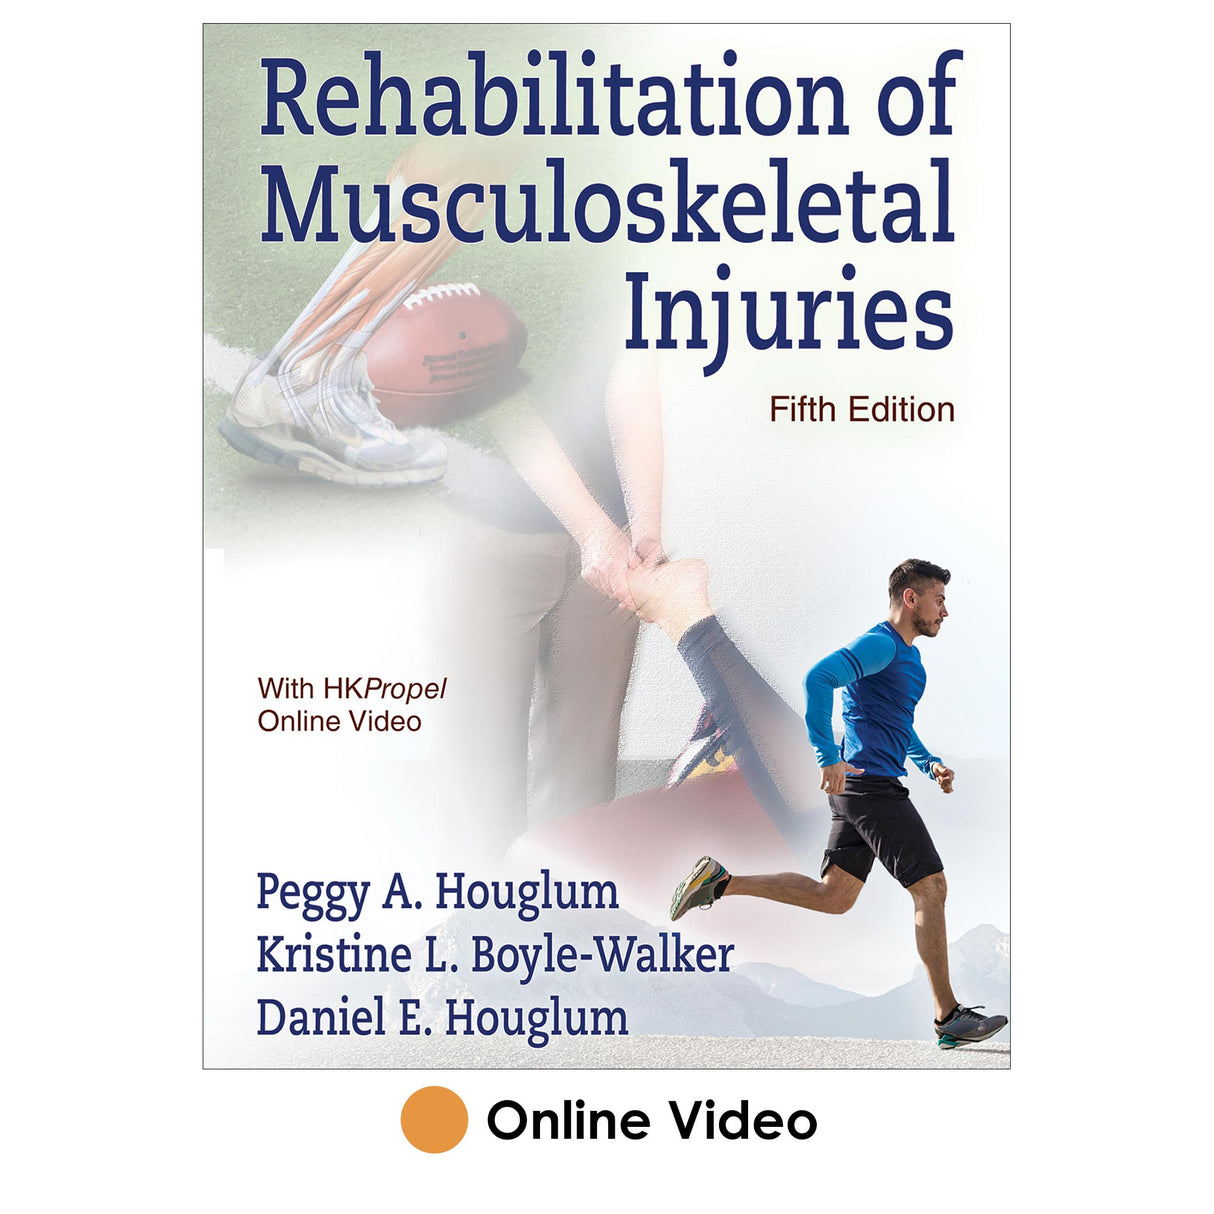 Rehabilitation of Musculoskeletal Injuries 5th Edition HKPropel Online Video